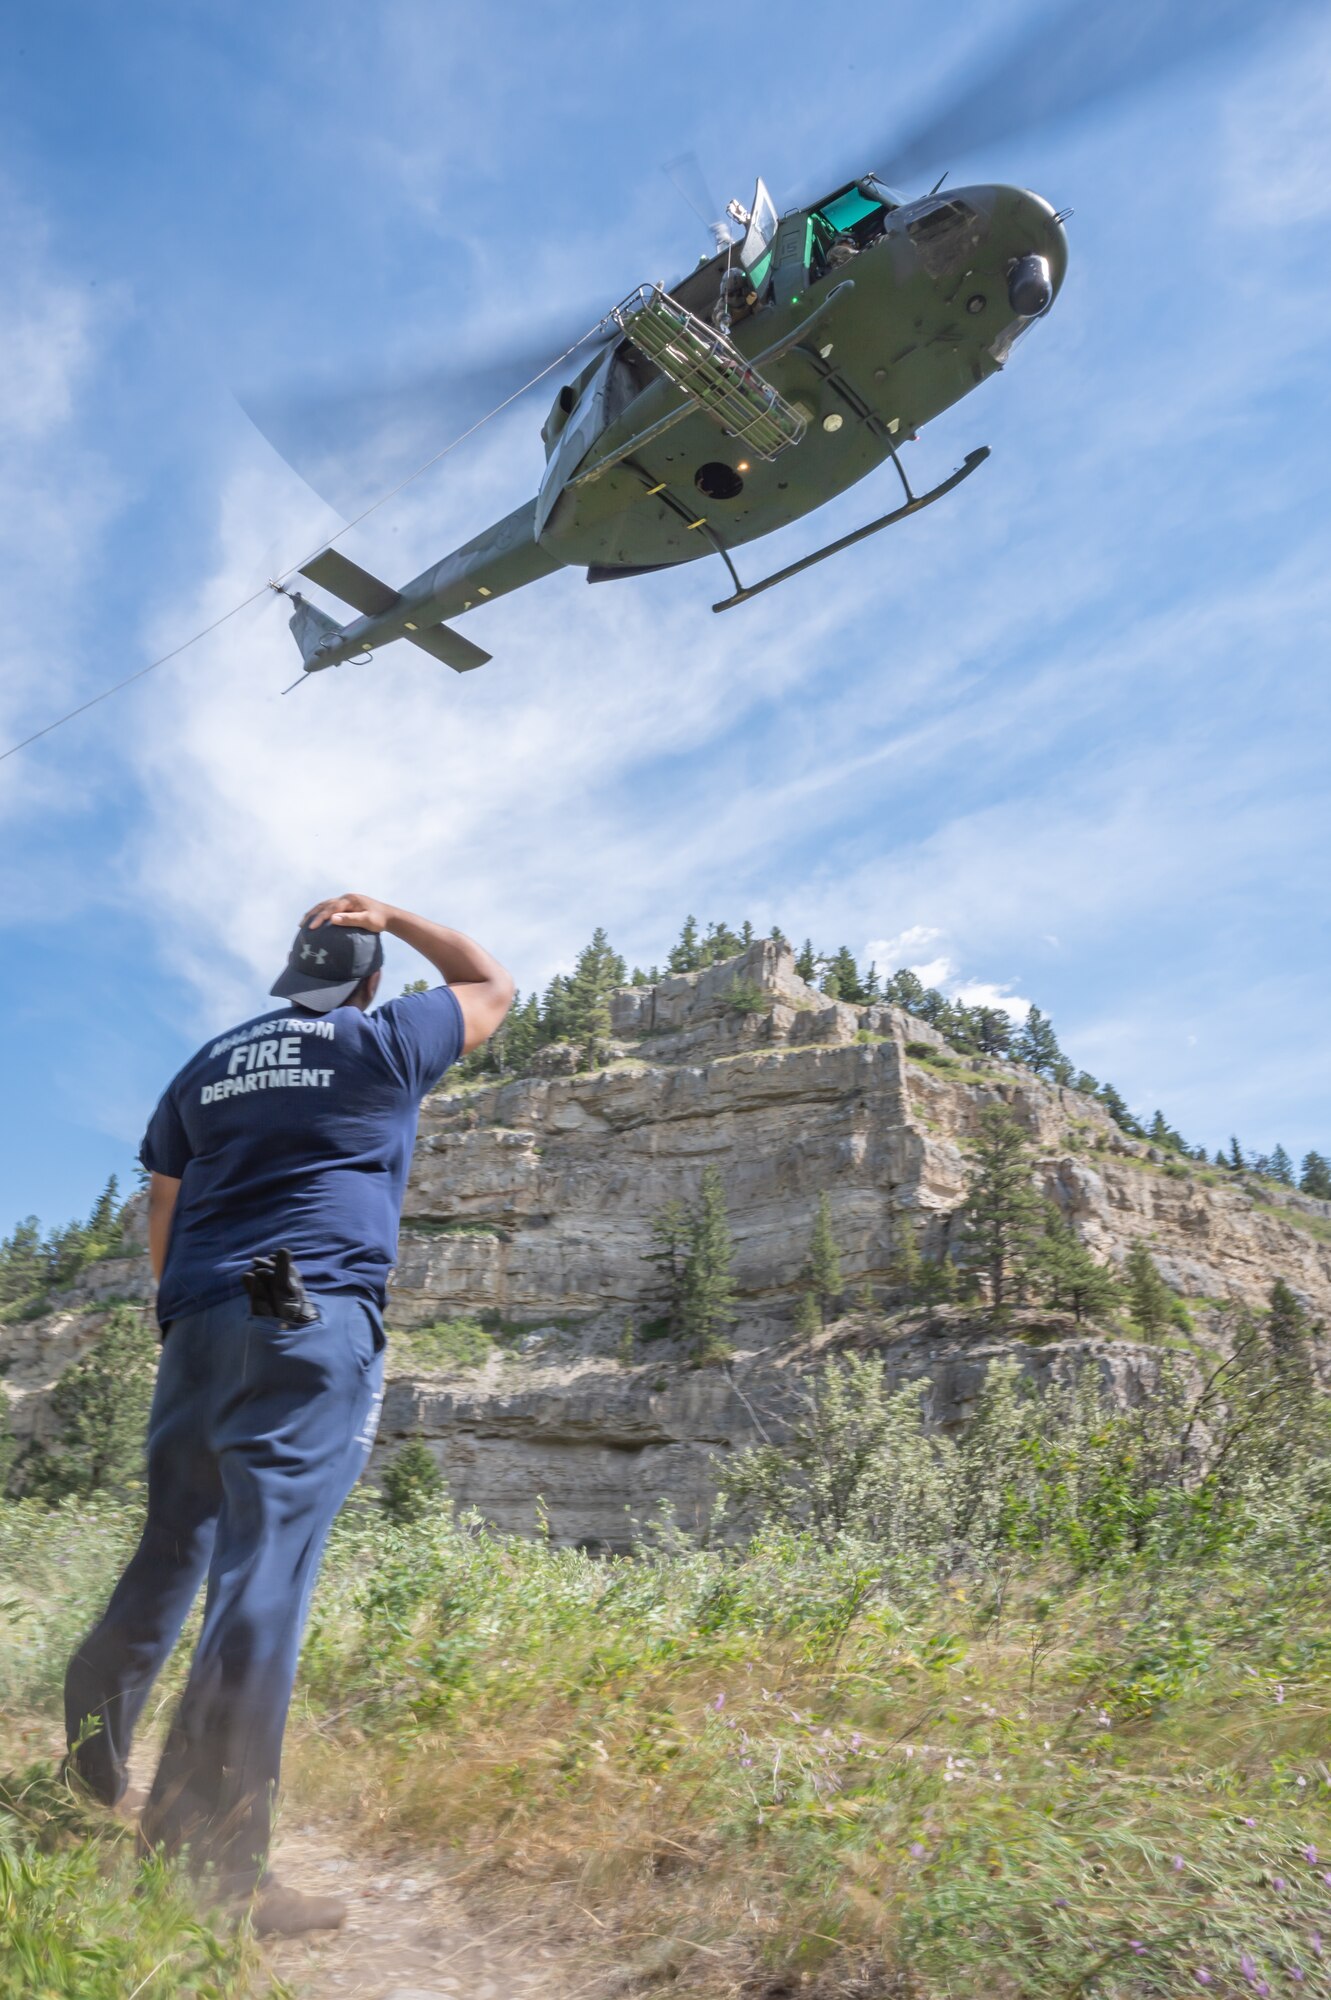 Tech. Sgt. Lee Mathews, 341st Civil Engineer Squadron Fire Department NCO in charge of the emergency communications center, looks up at a UH-N1 Huey helicopter Aug. 2, 2022, in Sluice Boxes State Park, Mont.